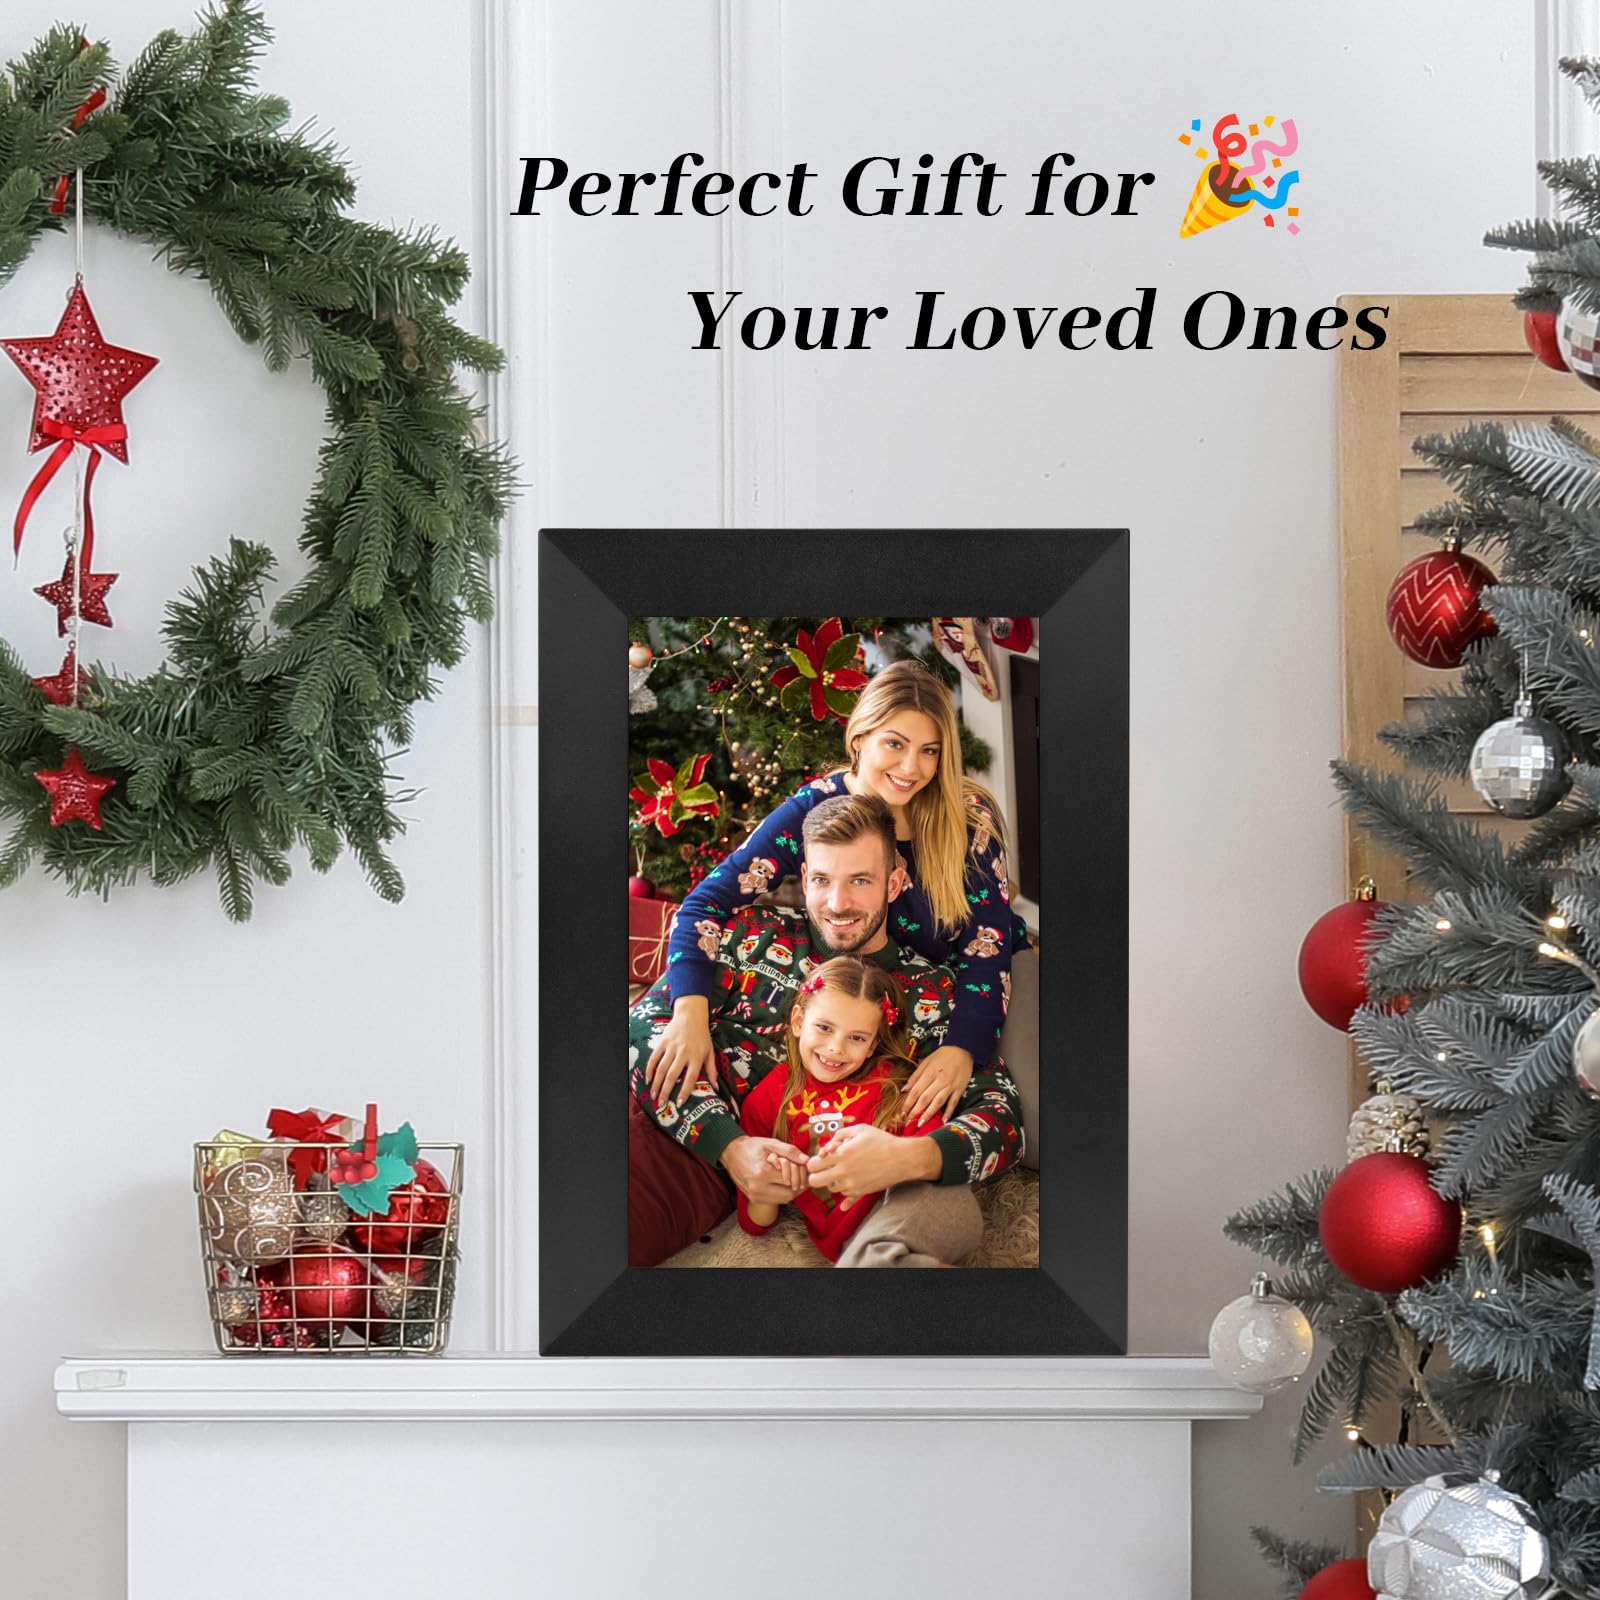 Anna Bella Digital Picture Frame 8 Inch WiFi Digital Photo Frame IPS HD Touch Screen, Smart Cloud Photo Frame with 16GB Storage Share Photos and Videos Via AiMOR App Anytime Anywhere